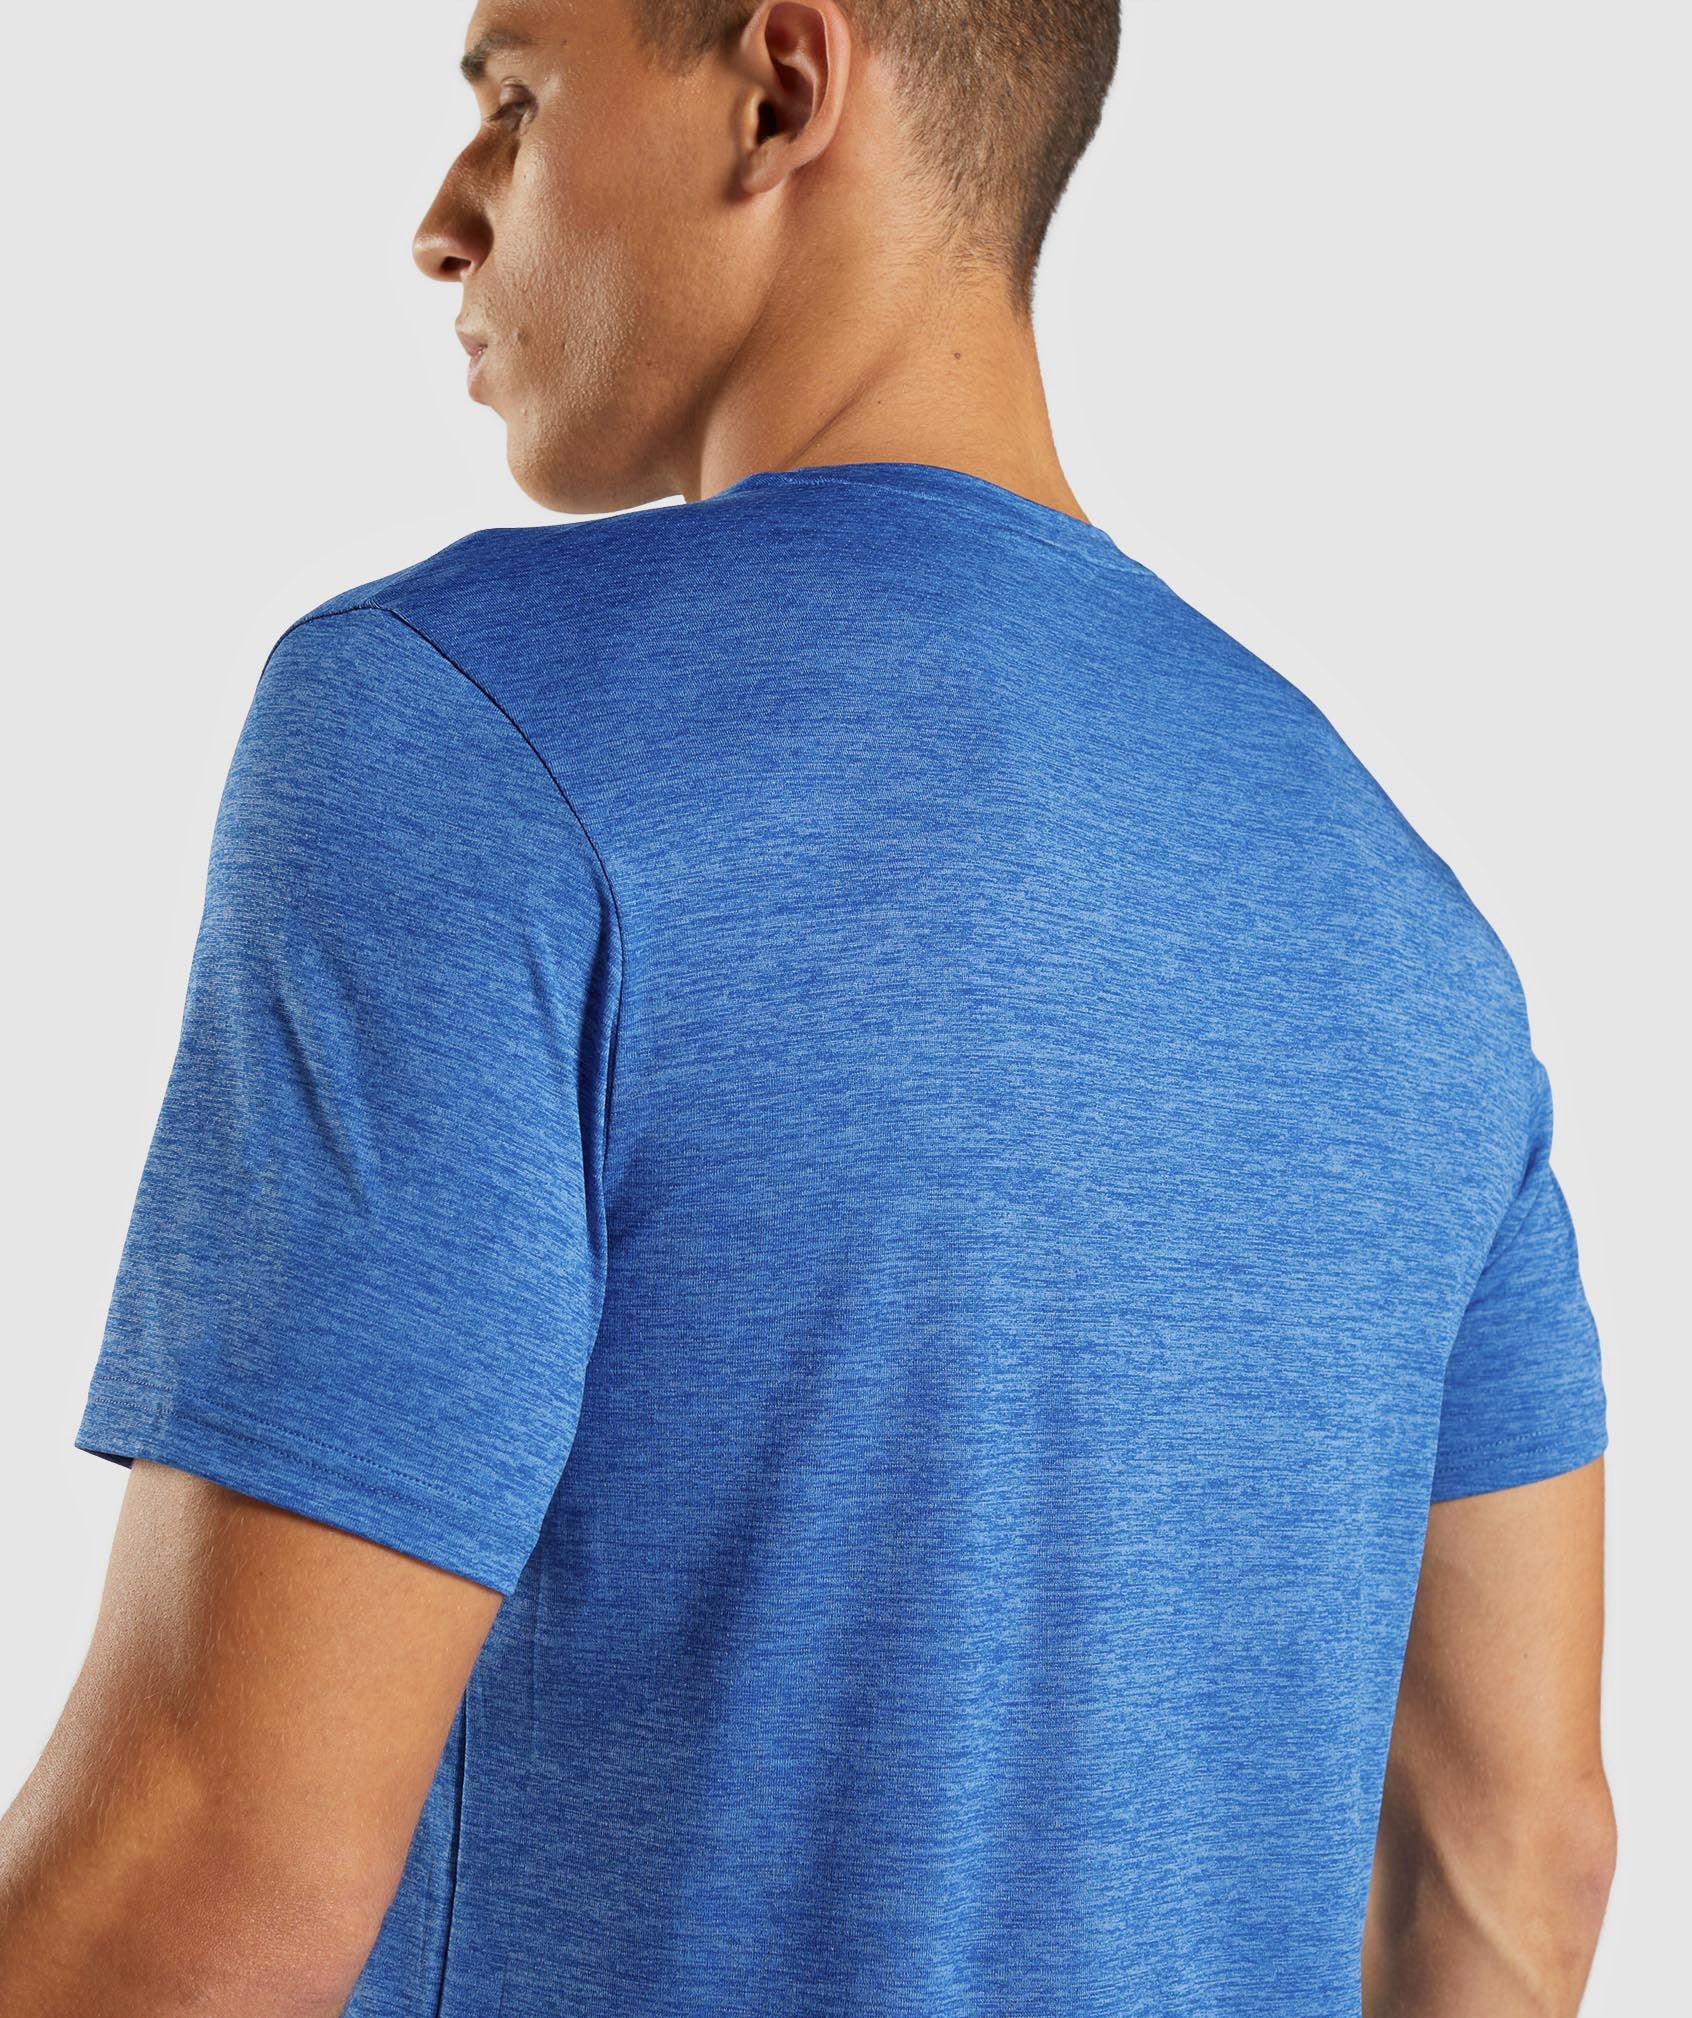 Arrival Marl T-Shirt in Athletic Blue/Javelin Blue Marl - view 6